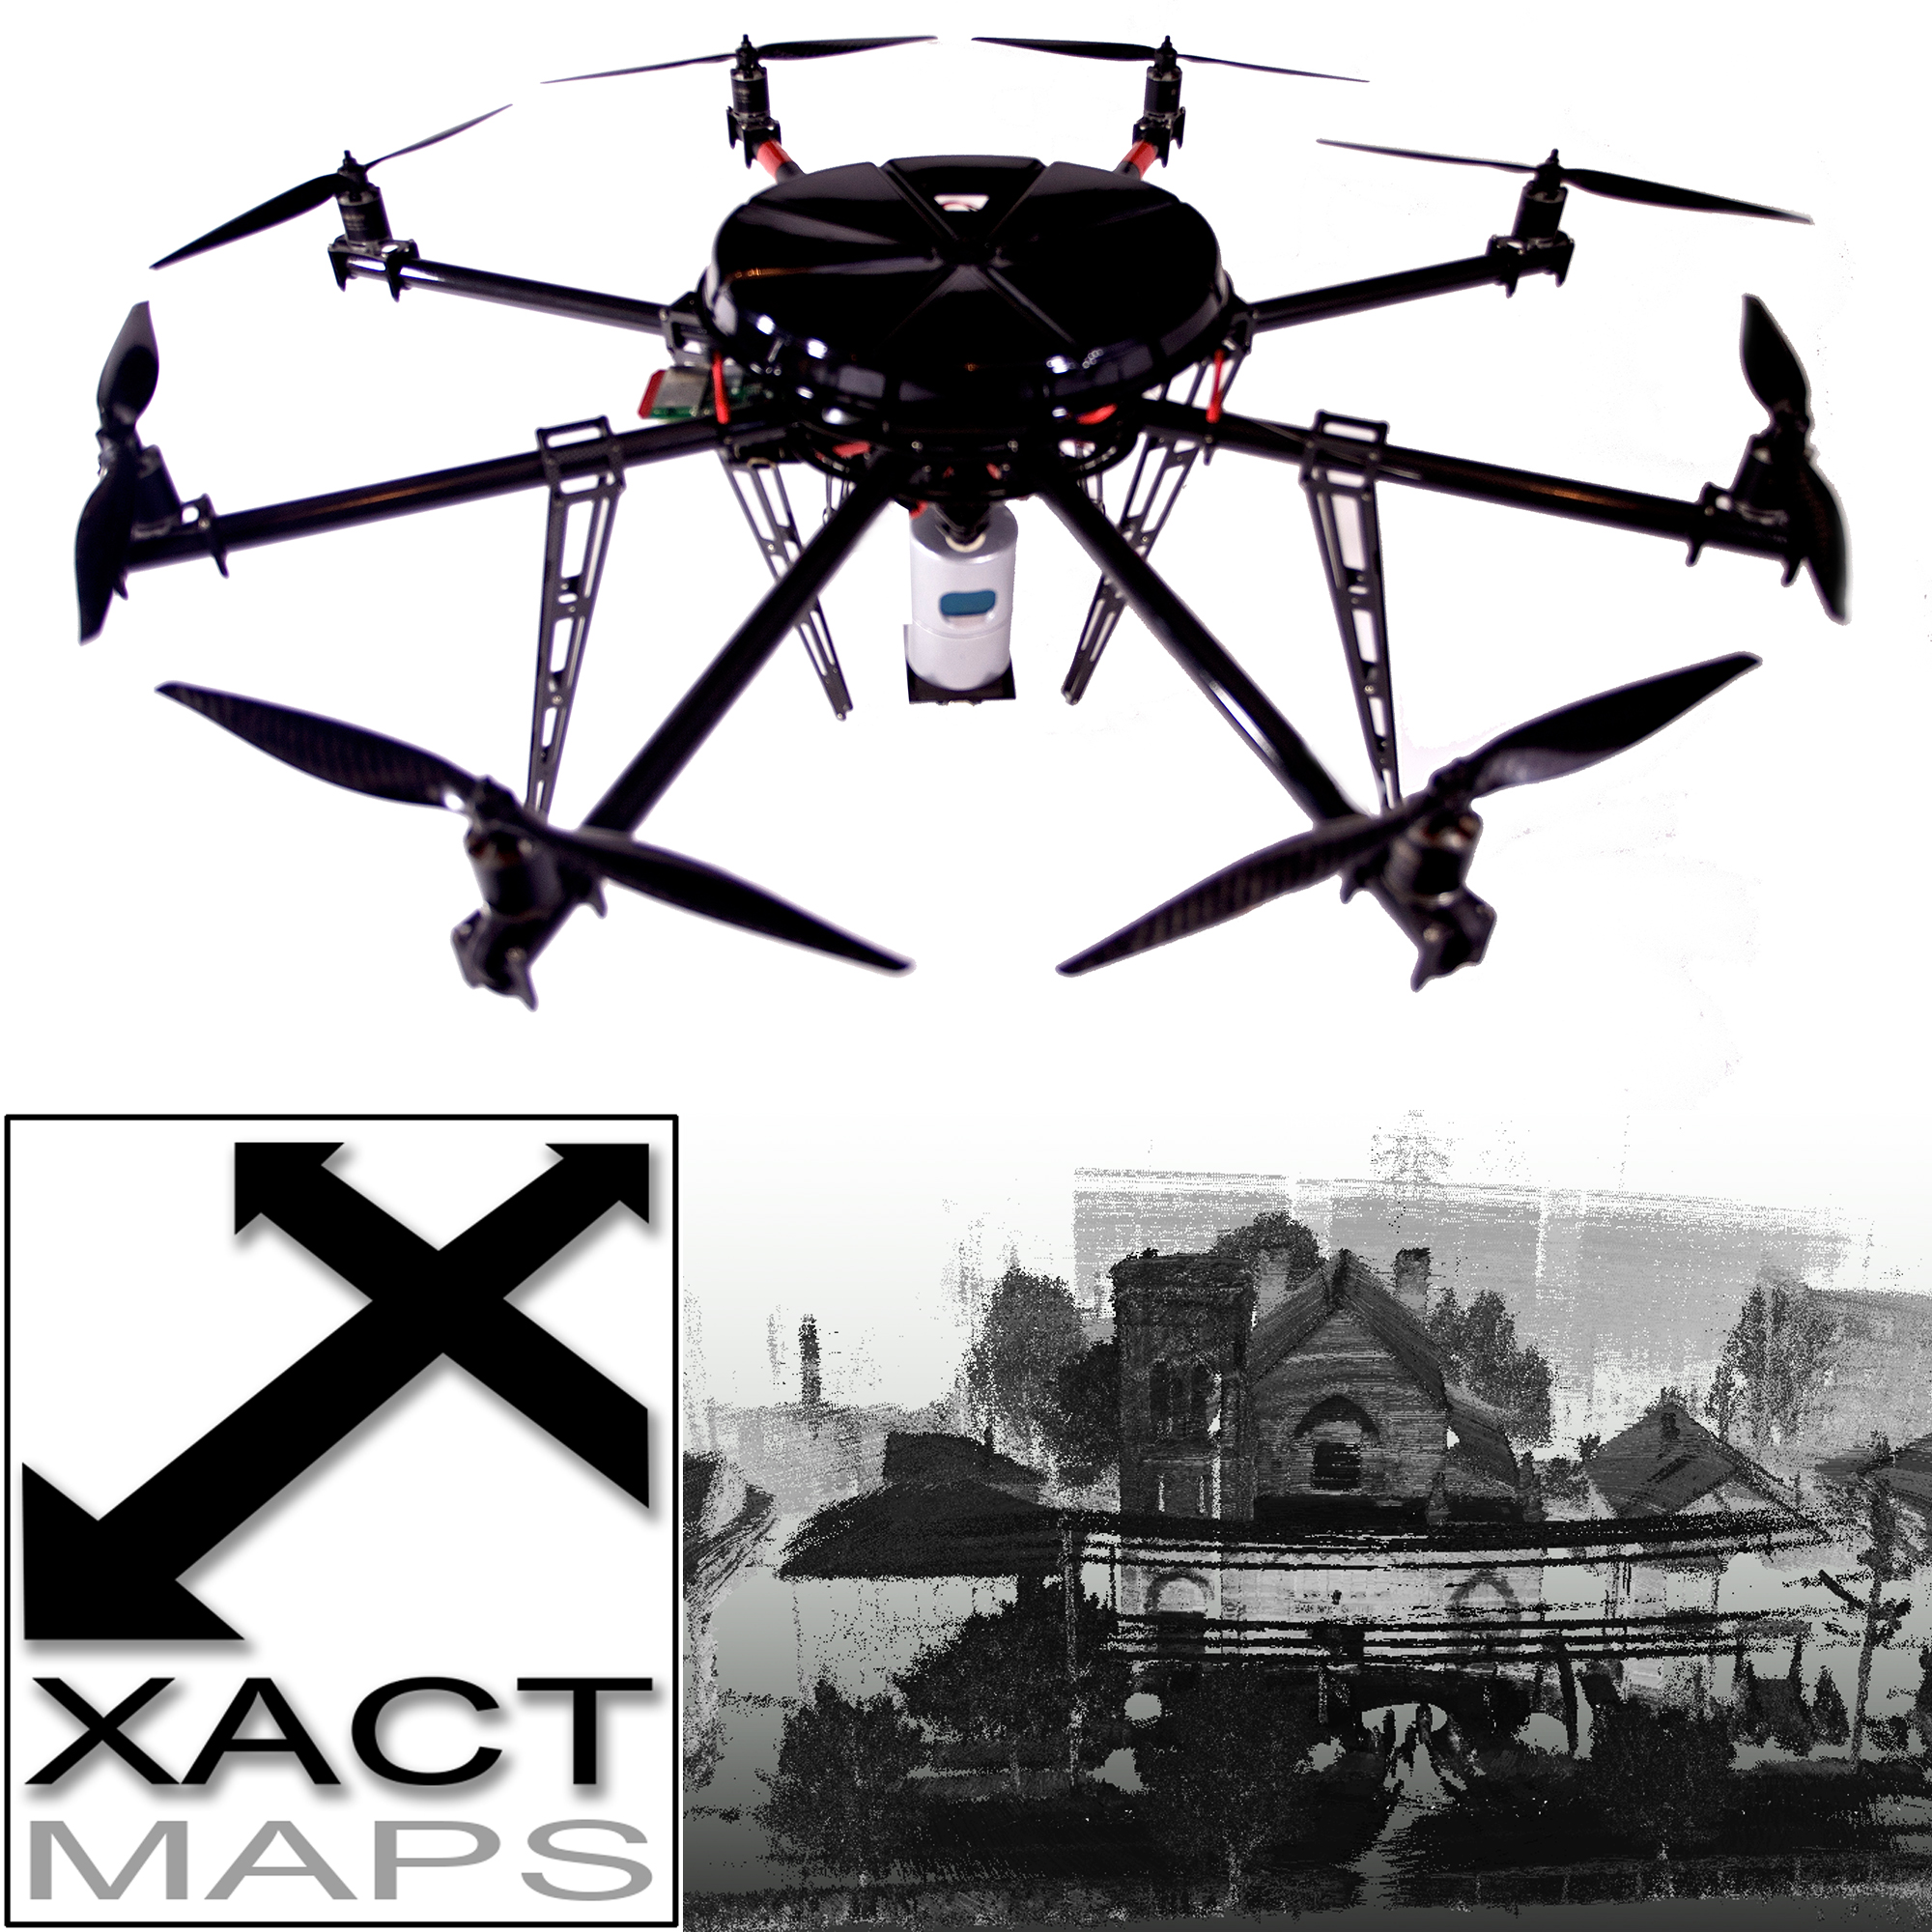 XactMaps has again revolutionized the game by announcing the first ever UAV aerial mapping and surveying solution free from the confines of satellite positioning systems.